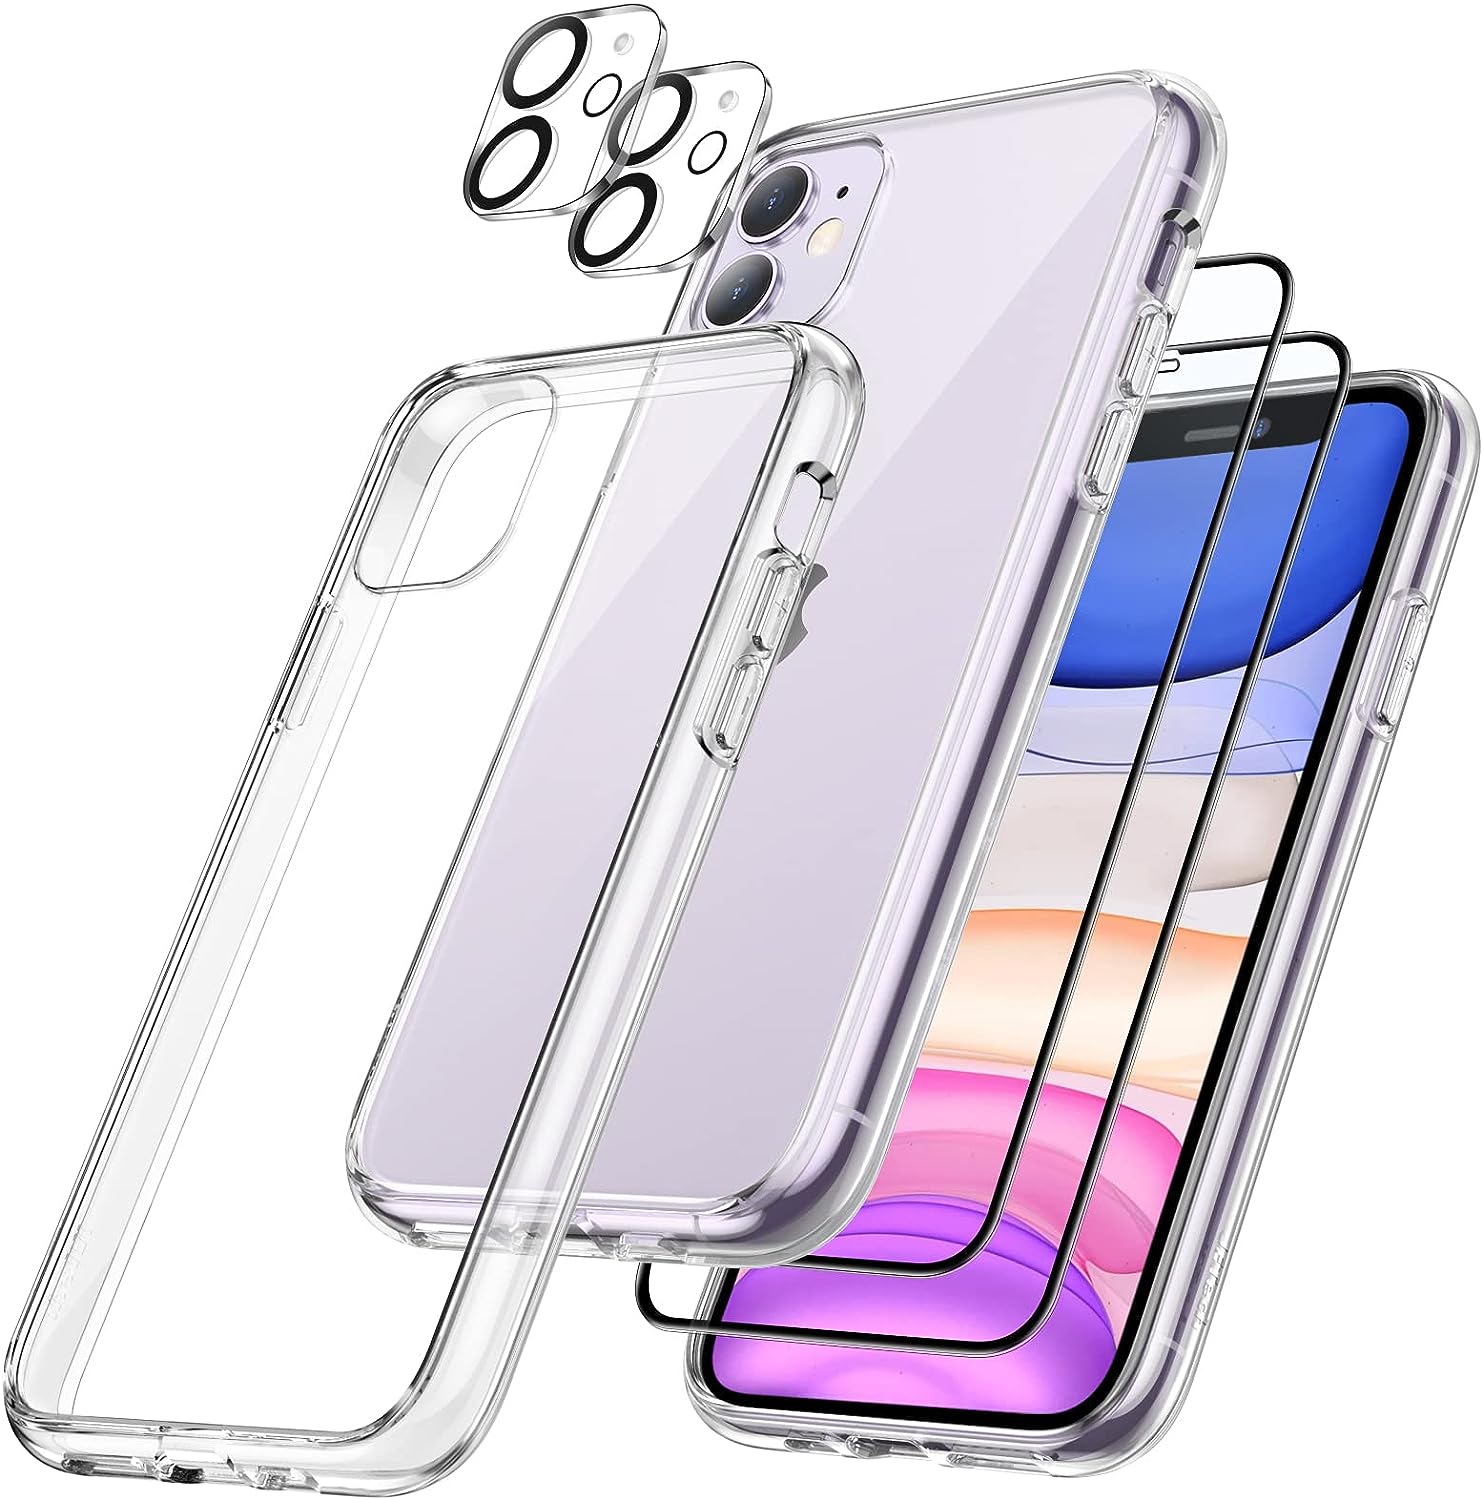 3 in 1 Combo - Case, Screen Protector & Camera Lens Protector for iPhone 11 *Free Shipping*